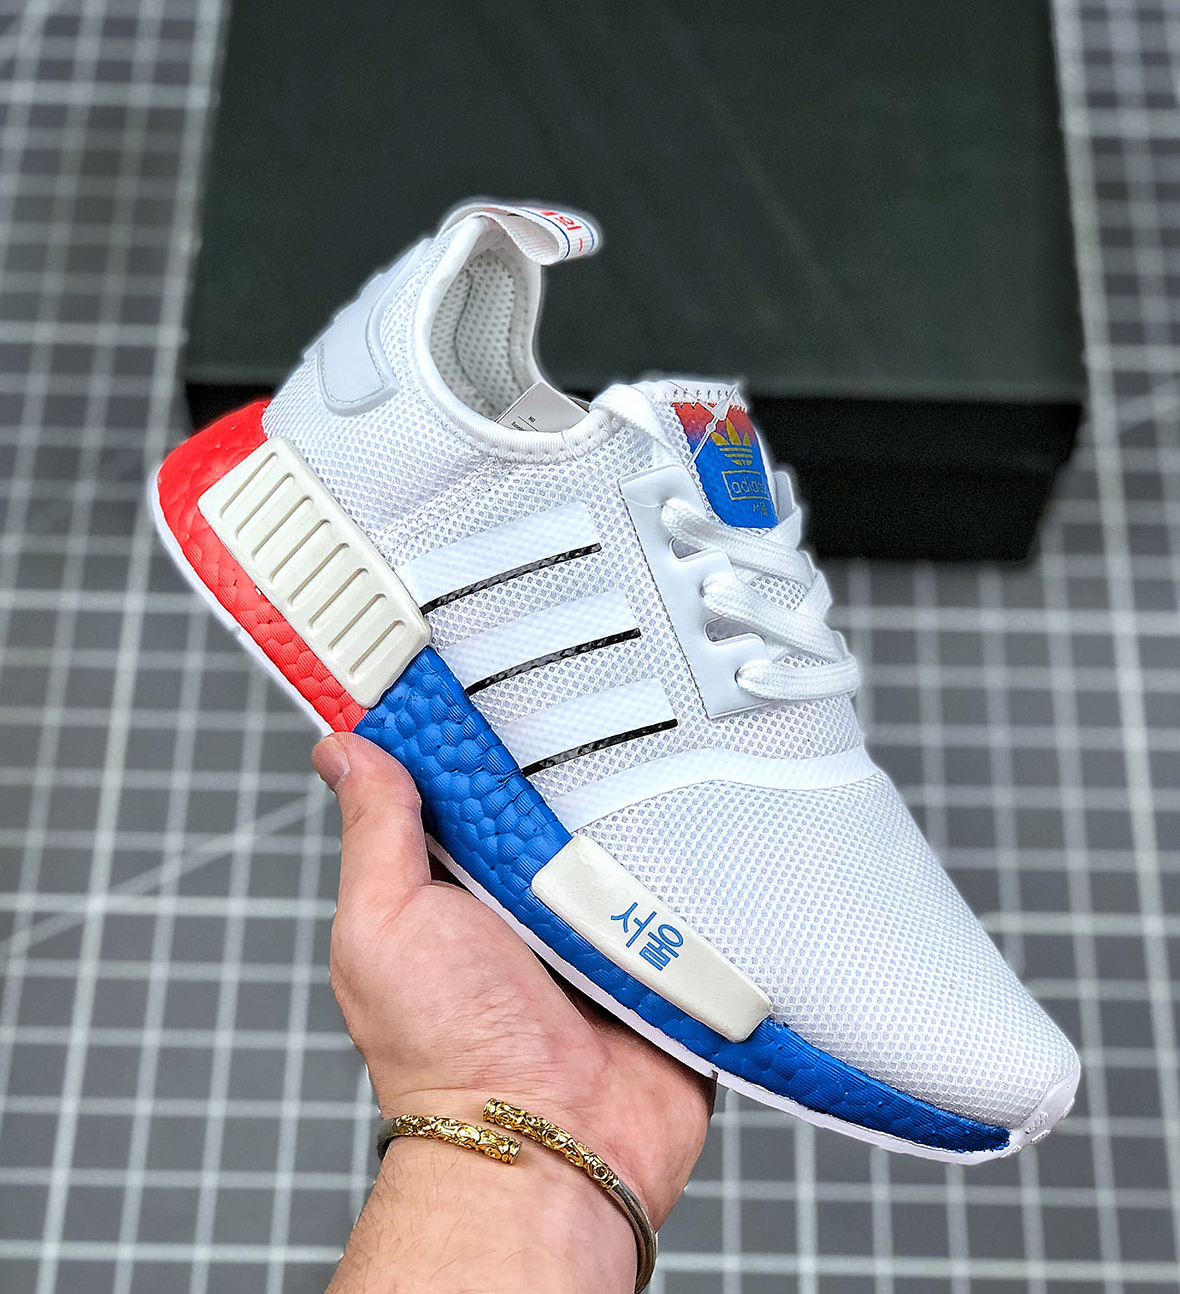 what does nmd r1 stand for